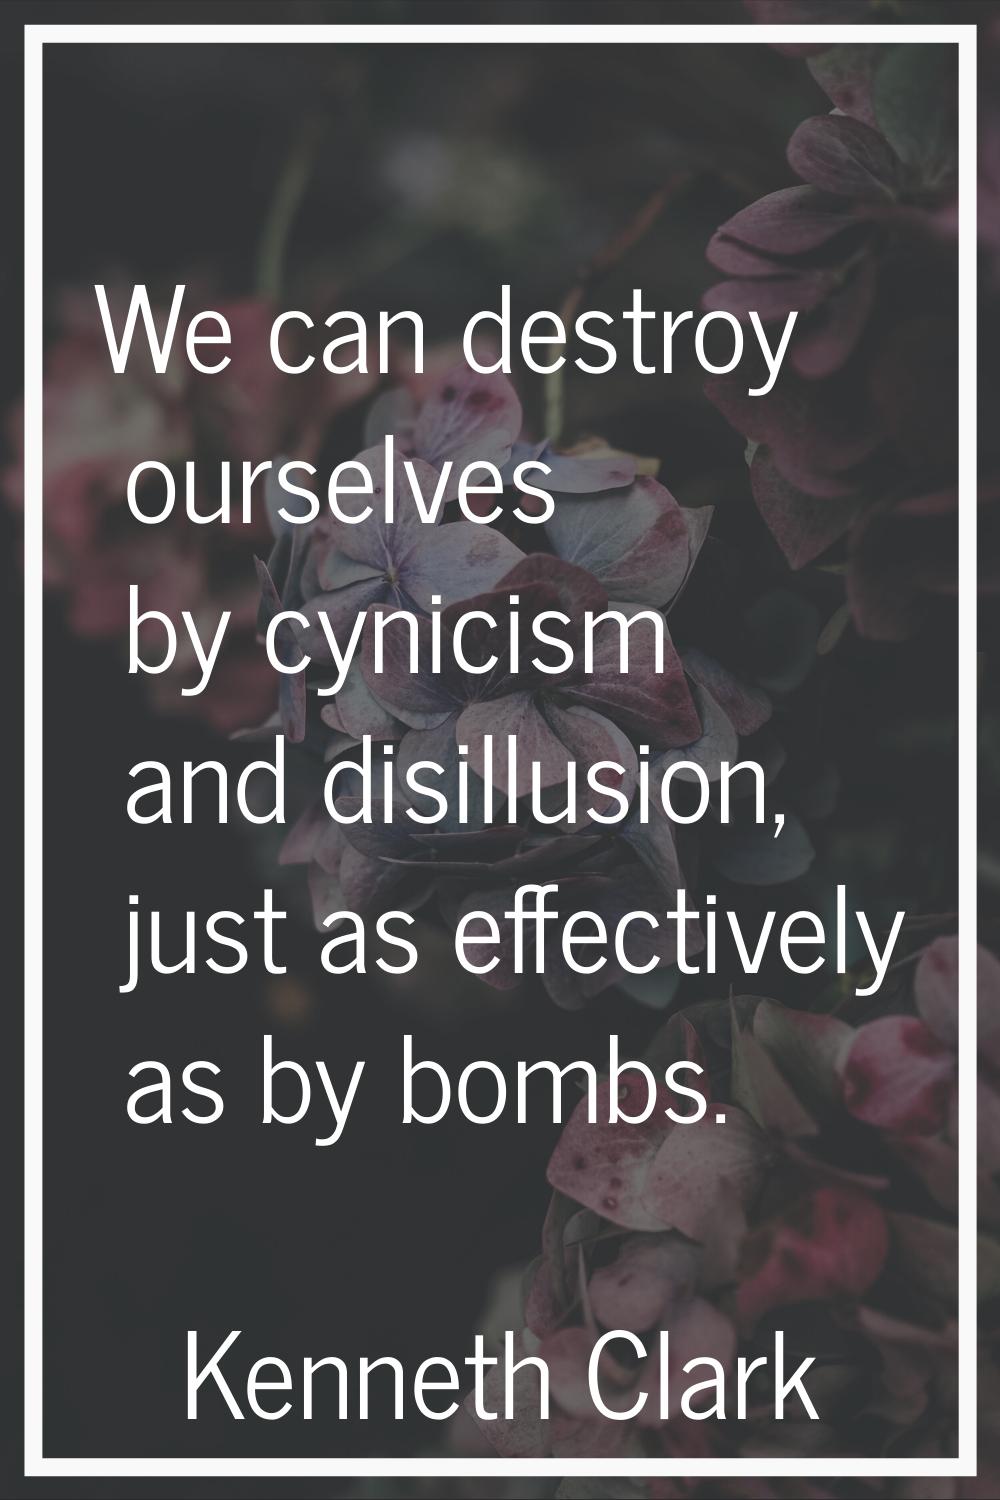 We can destroy ourselves by cynicism and disillusion, just as effectively as by bombs.